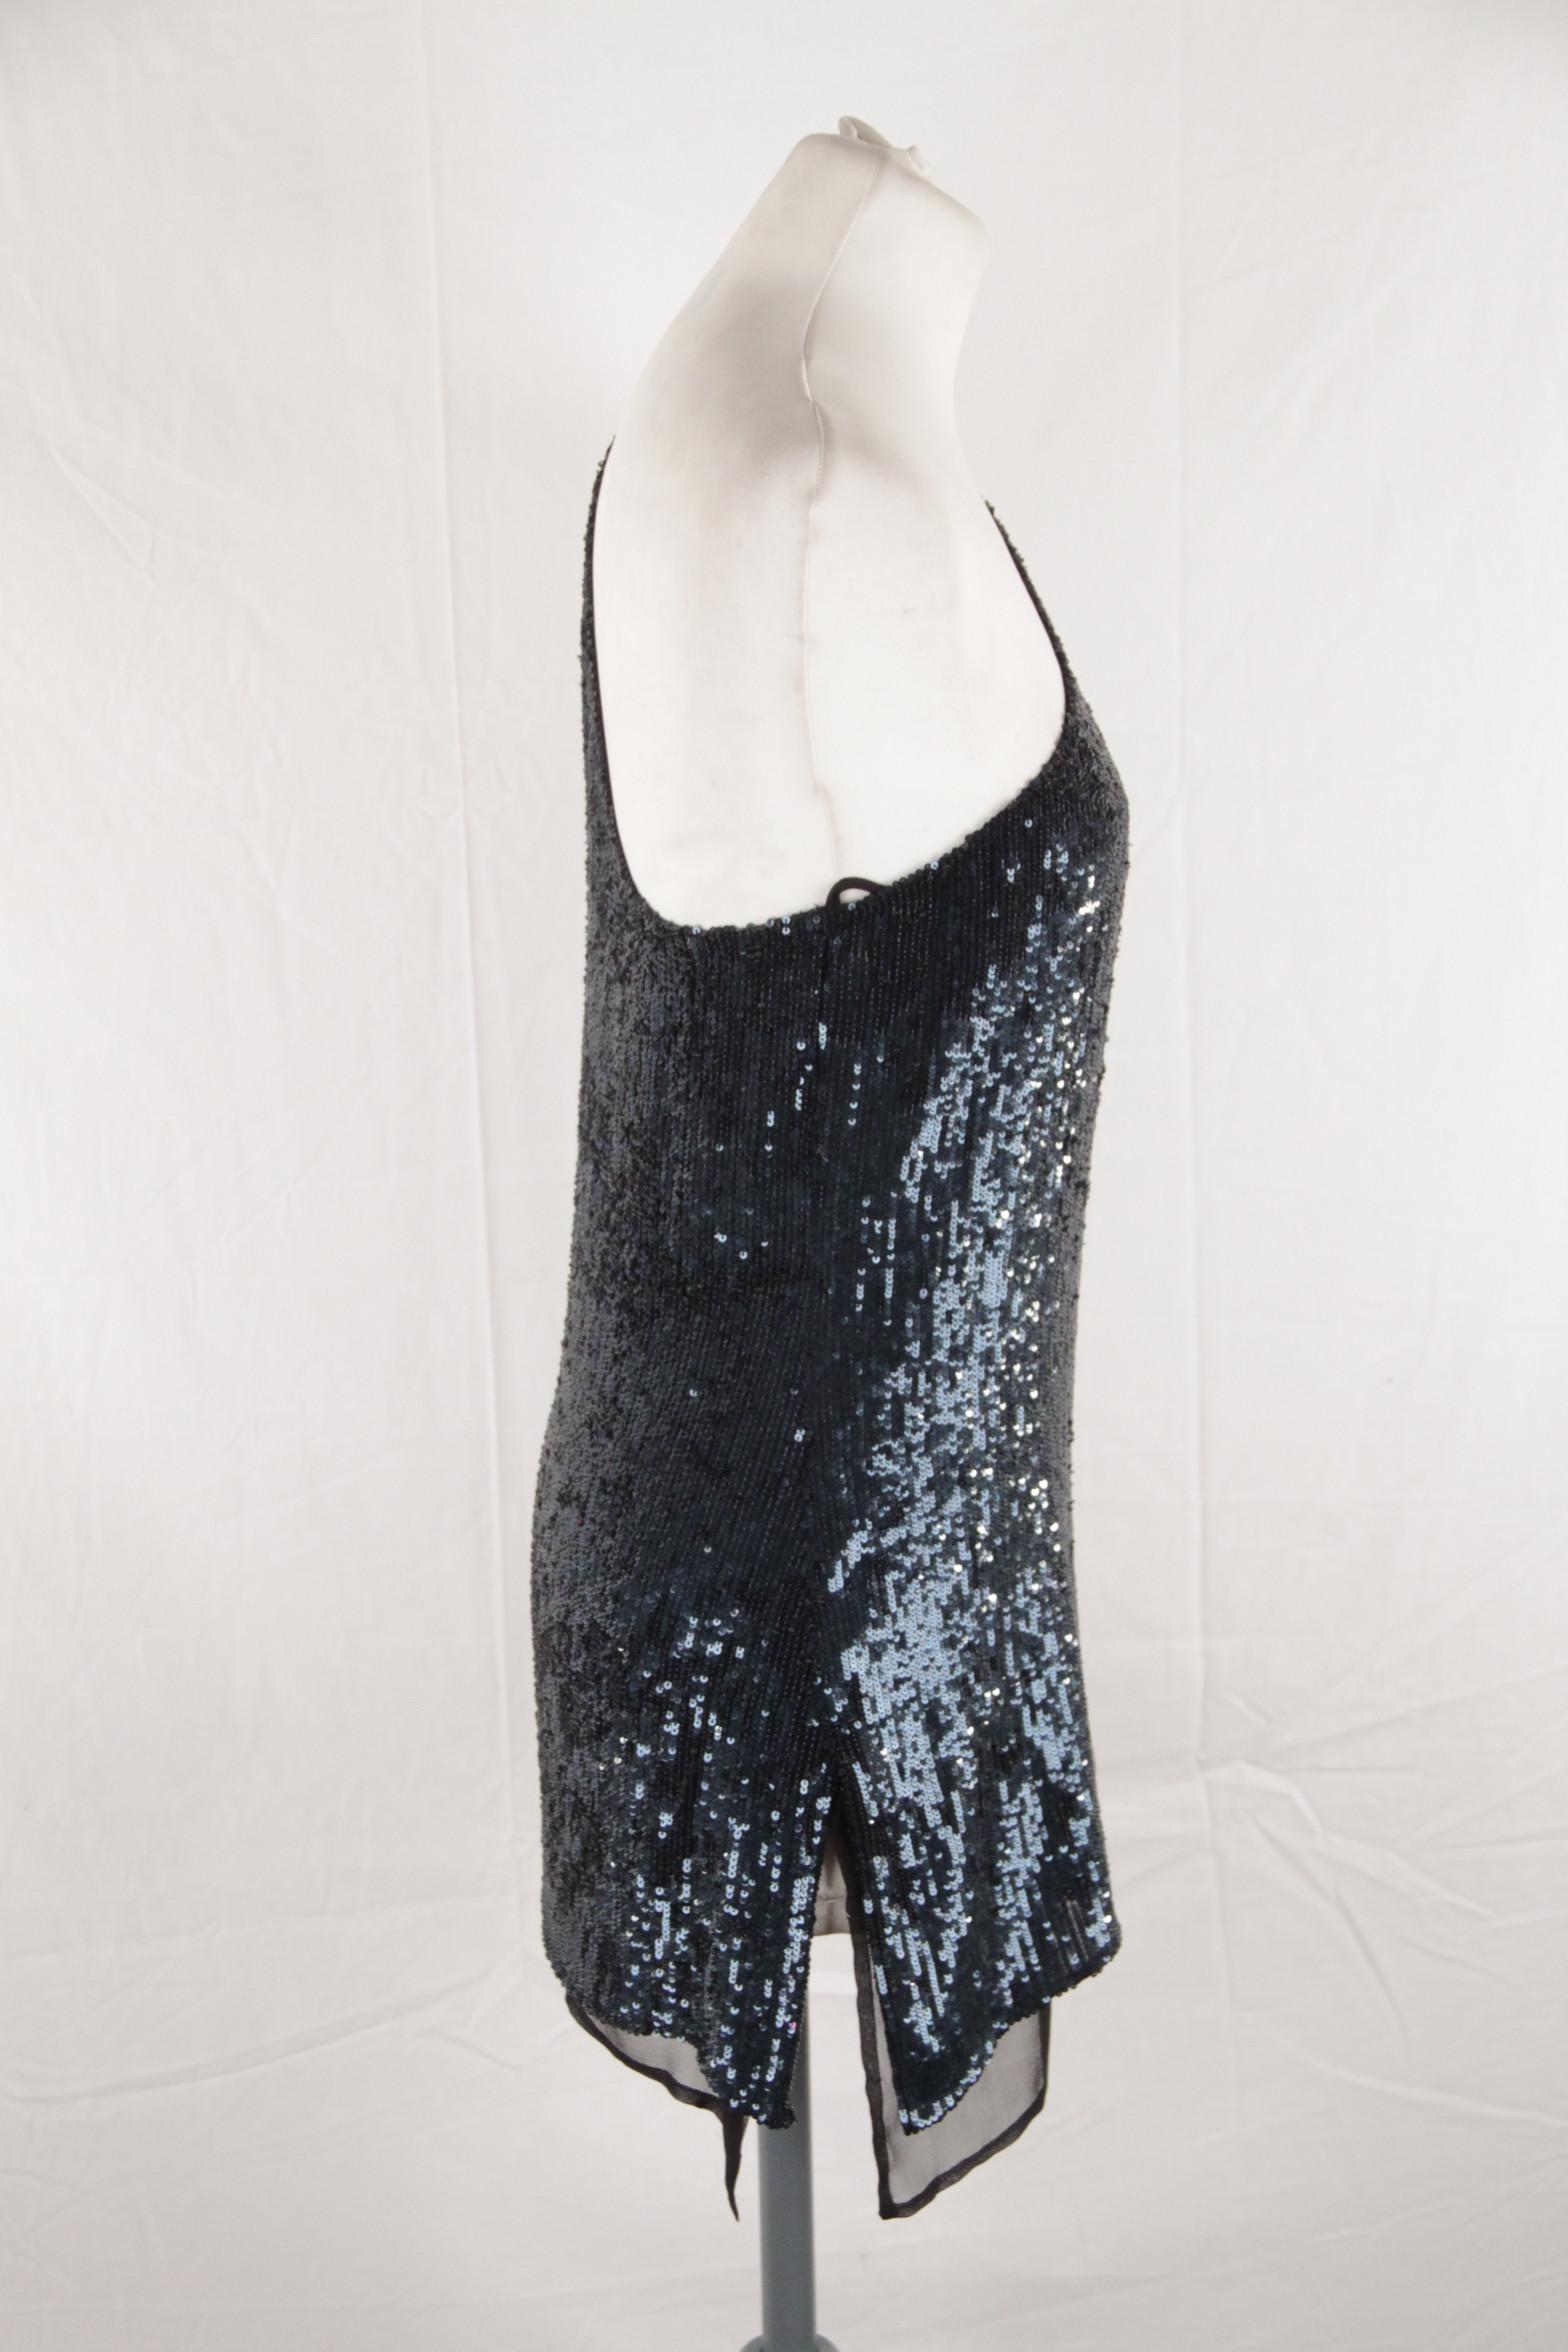 One shoulder top - All over sequin embellishment - 100% Silk - Asymmetric hem - Side zip closure - Size 2 (The size shown for this item is the size indicated by the designer on the label). it should correspond to a SMALL size Logos / Tags: 'PHILIPP